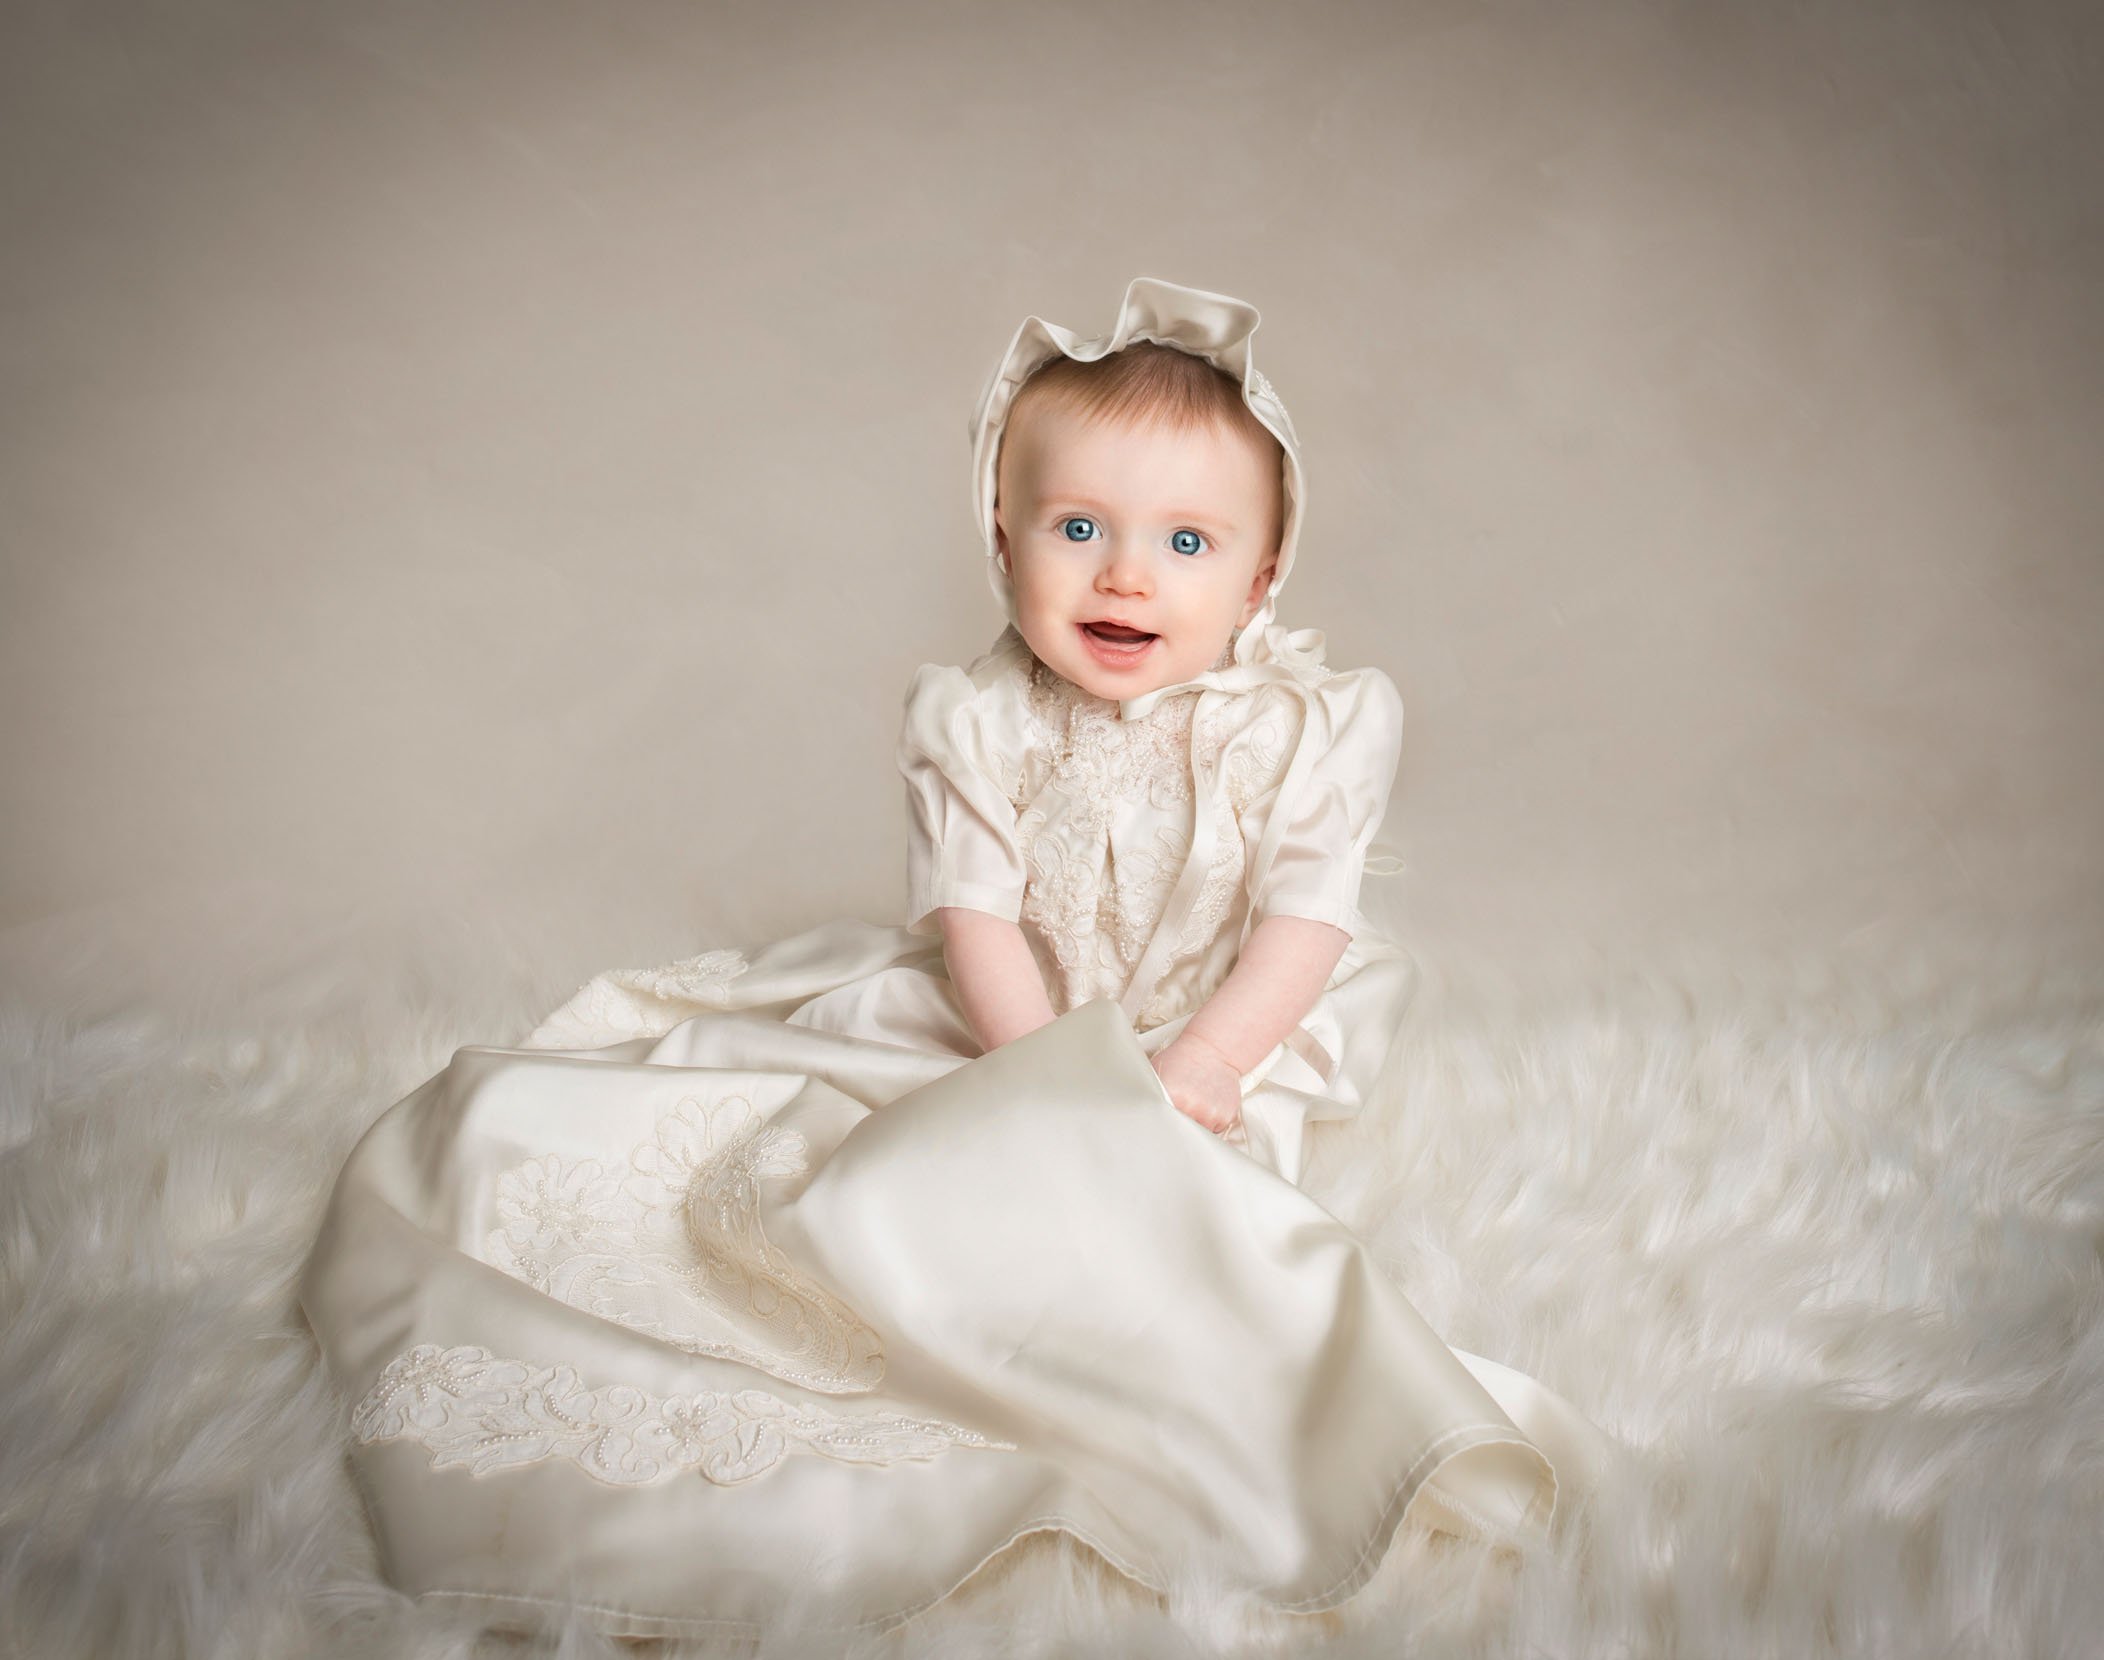 6 mo old baby girl dressed in a bonnet and fancy Christening gown